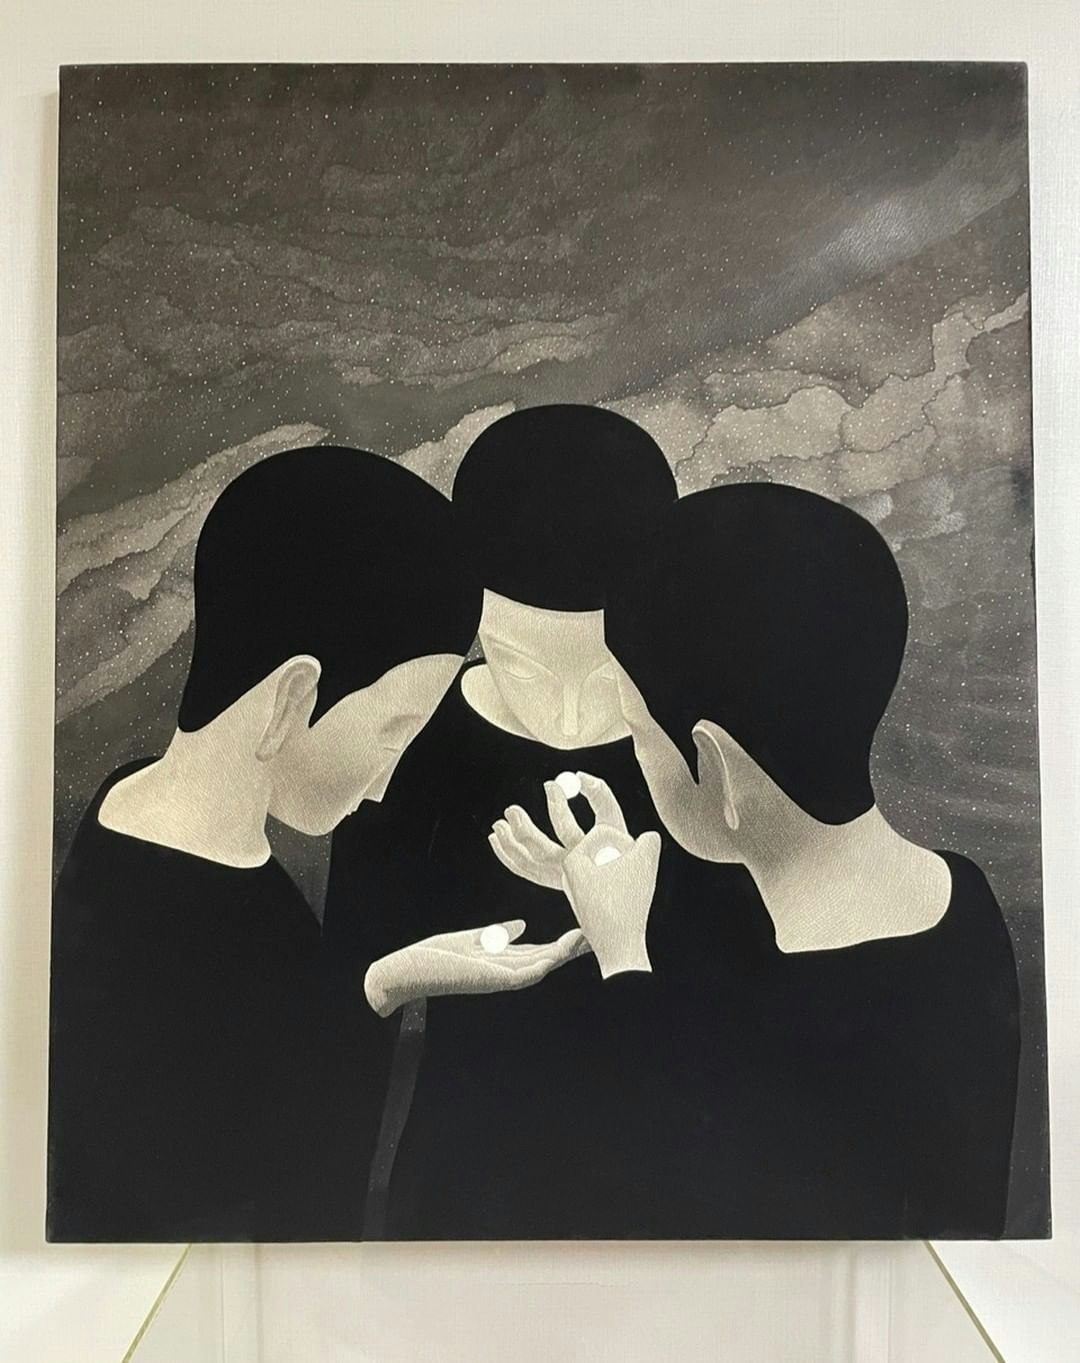 Collective Post - moonassi's painting